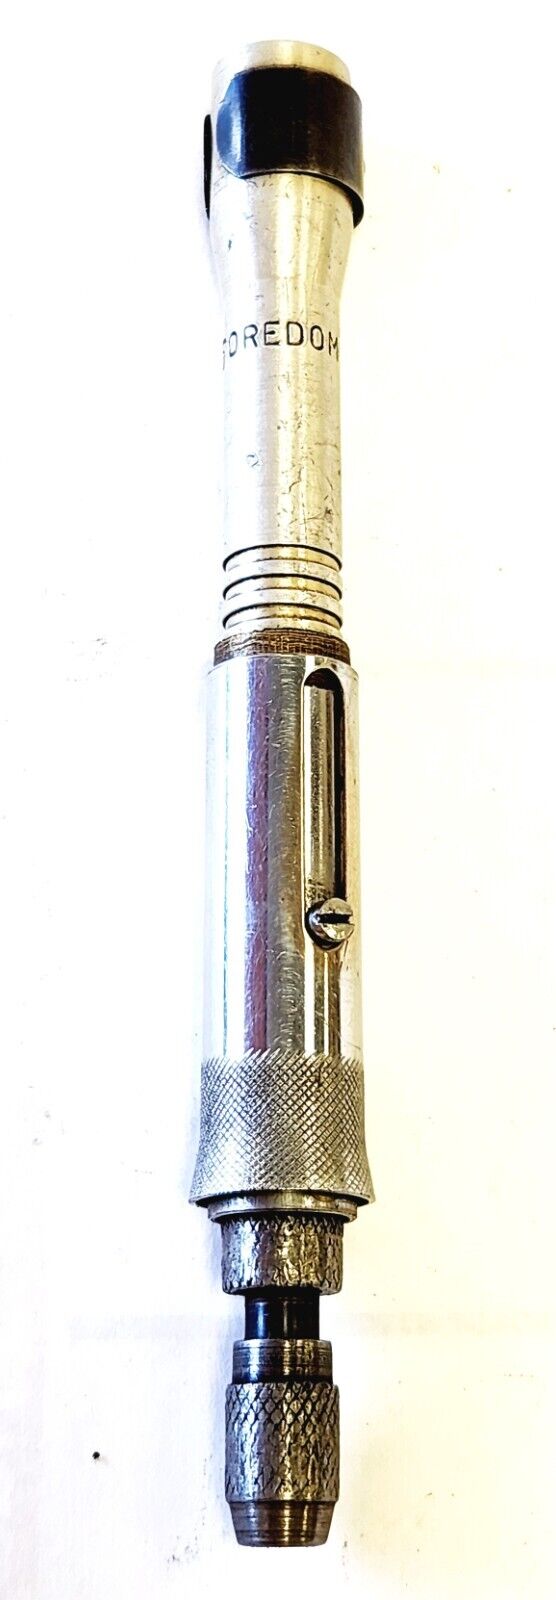 FOREDOM H.8 HANDPIECE COLLET TYPE ROTARY TOOL (VINTAGE)